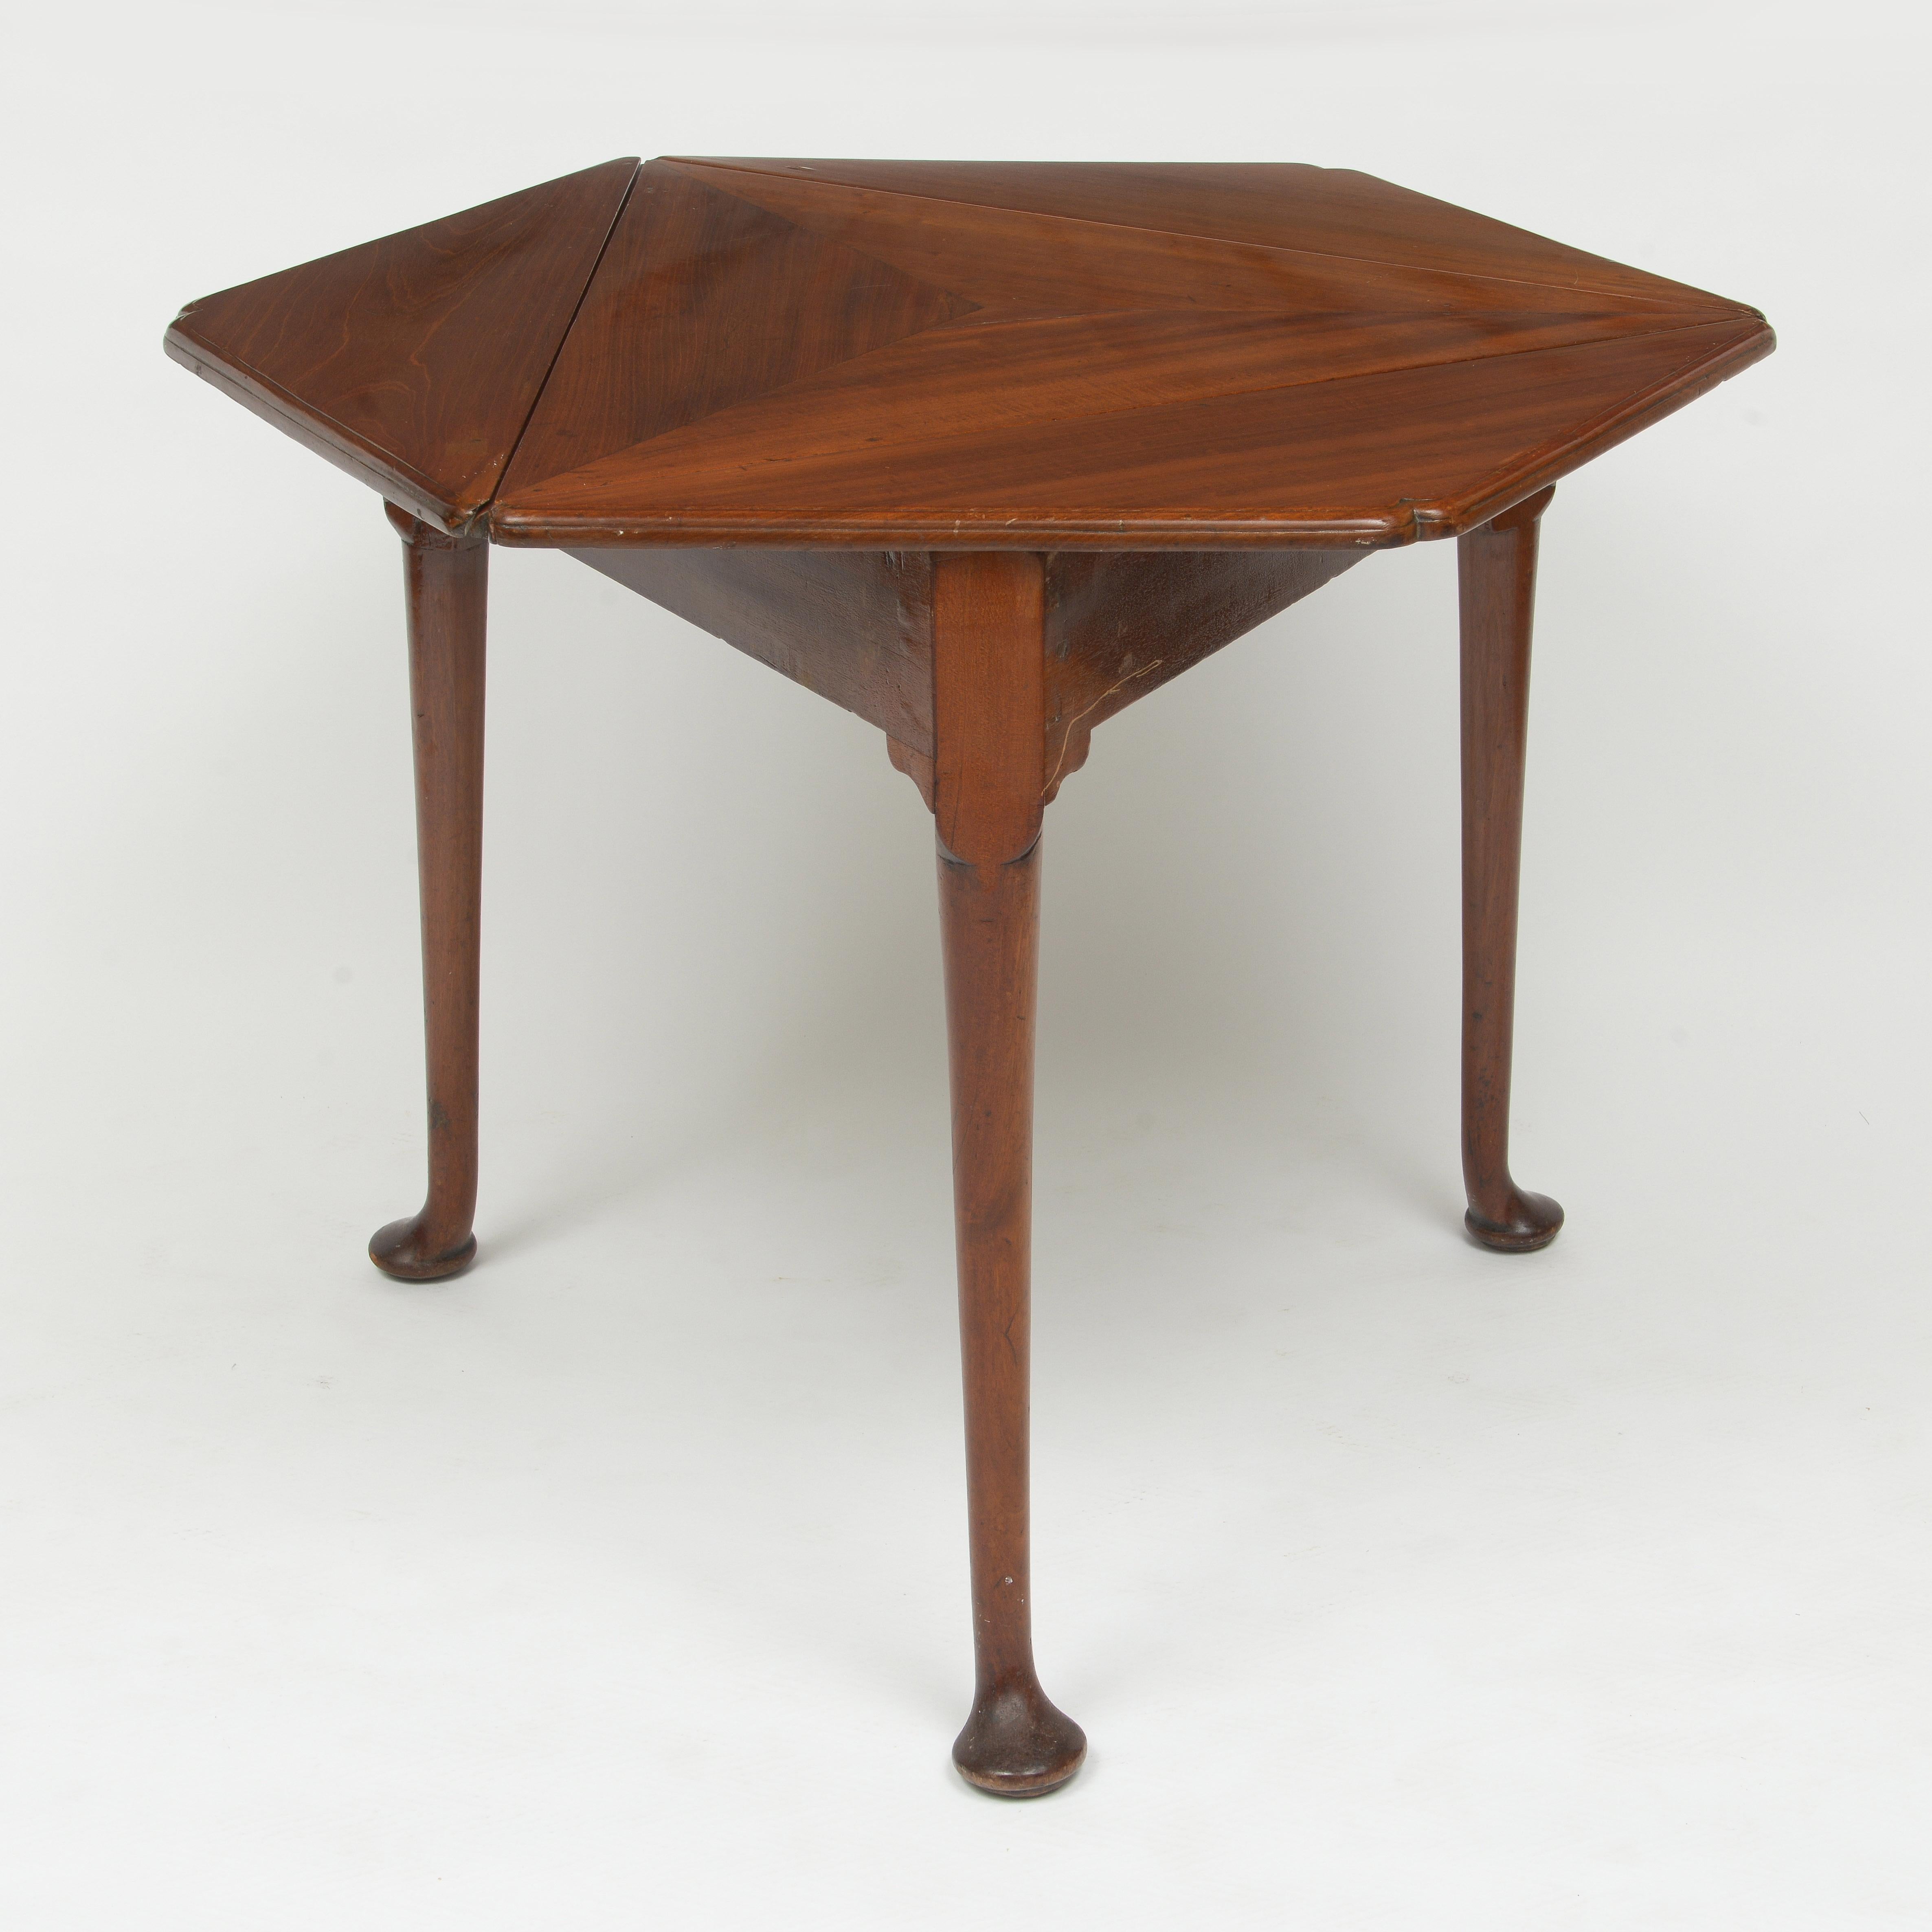 Triangle or hexagonal table
Leaves close as the top is rotated
Can be an accent table of small tea table or card table
Finely figured mahogany with carved dimple corners.
Legs are turned terminating in a pad foot.